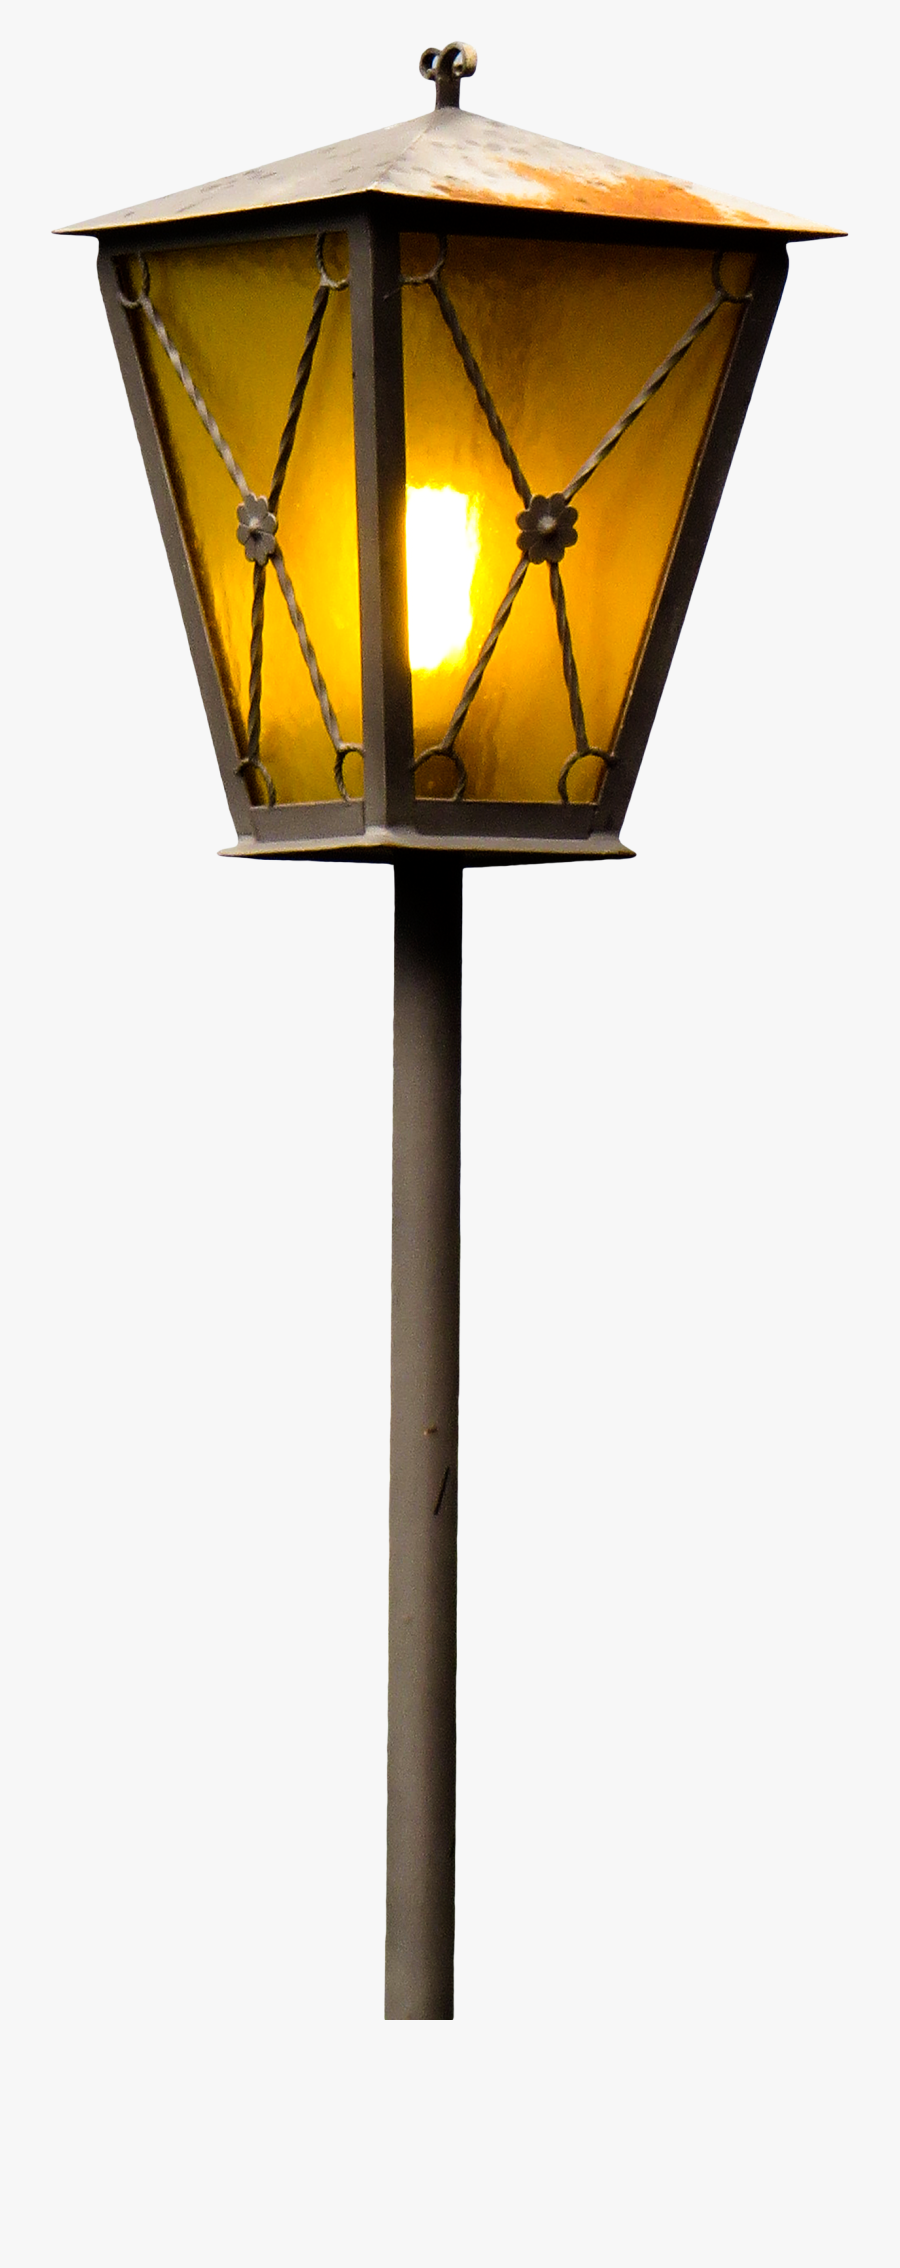 Old Street Lamp Png Image - Png Lamp, Transparent Clipart